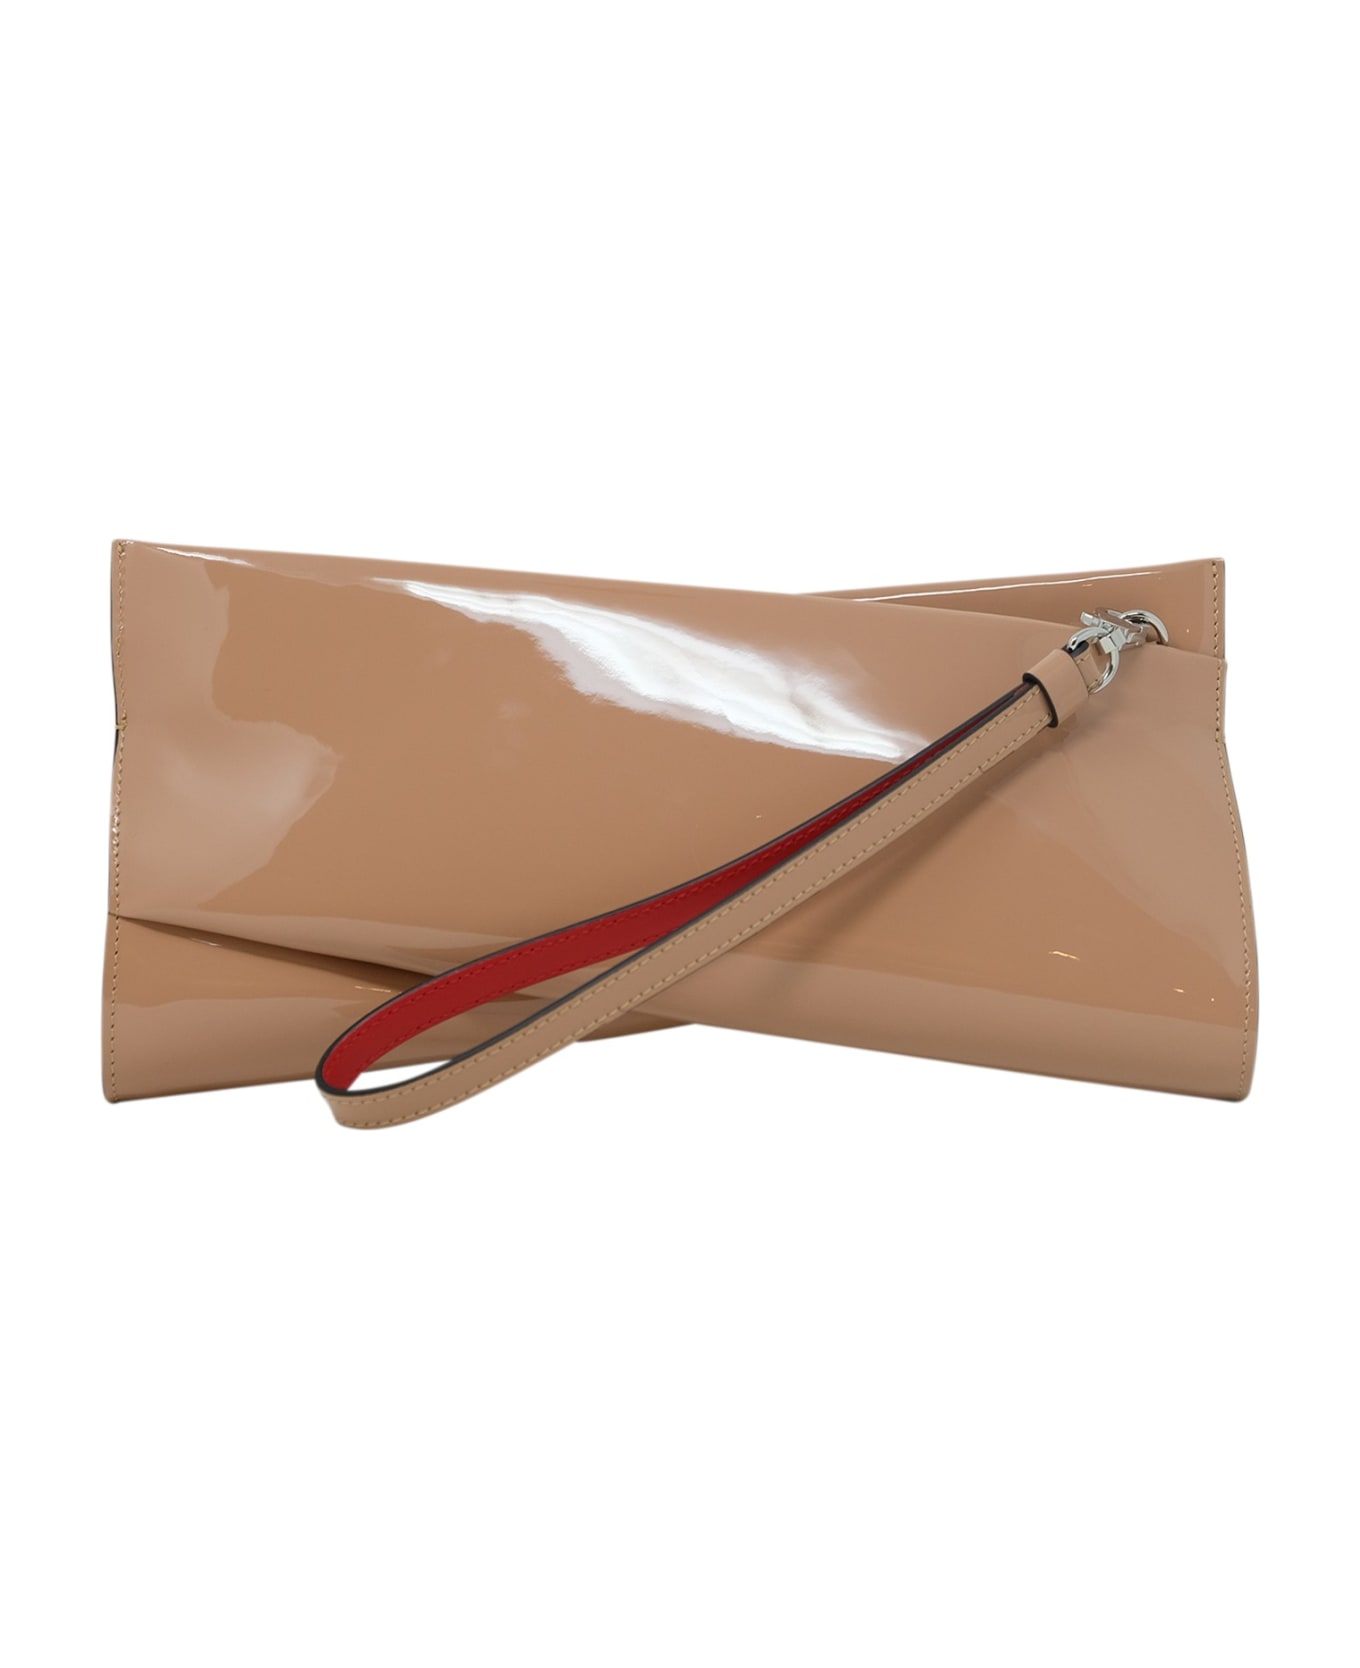 Christian Louboutin Nude Patent Leather Loubitwist Clutch Bag クラッチバッグ